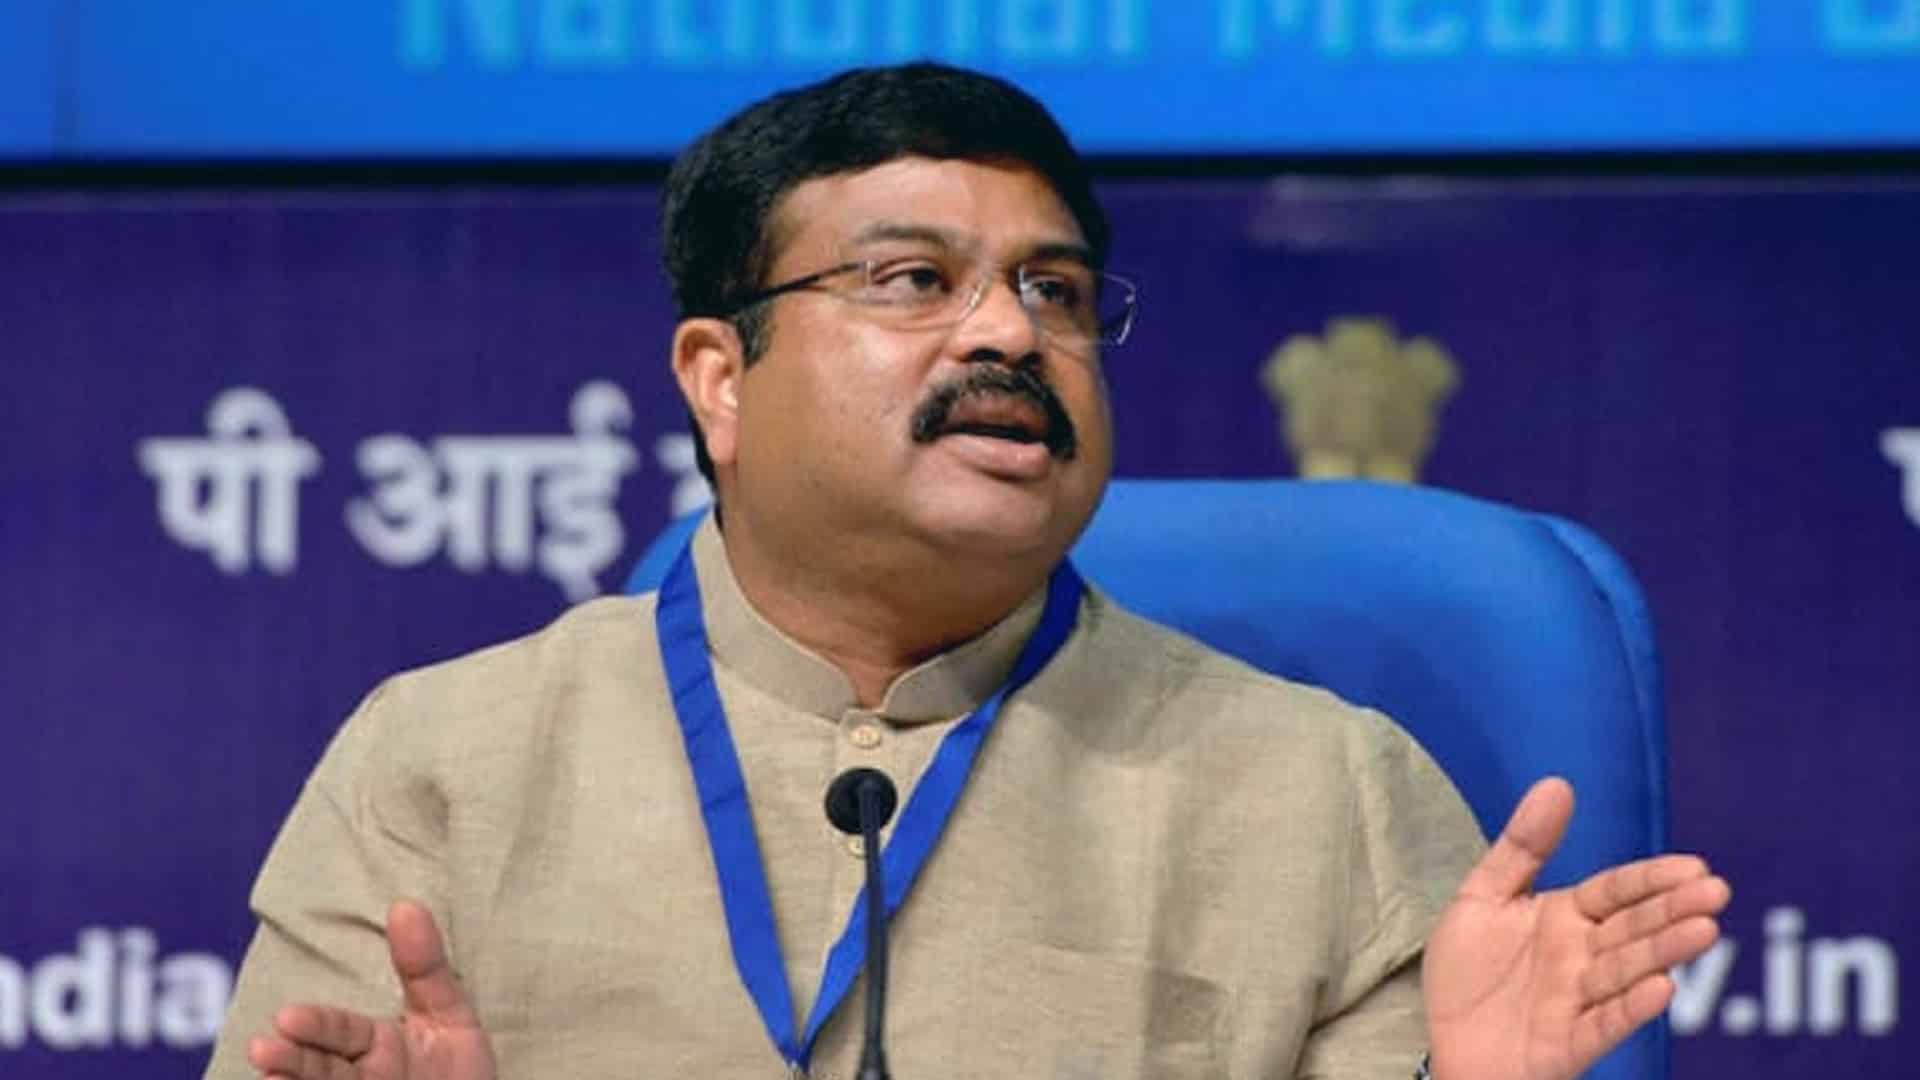 India has to become manufacturing economy to achieve 'Make in India' goal; Pradhan